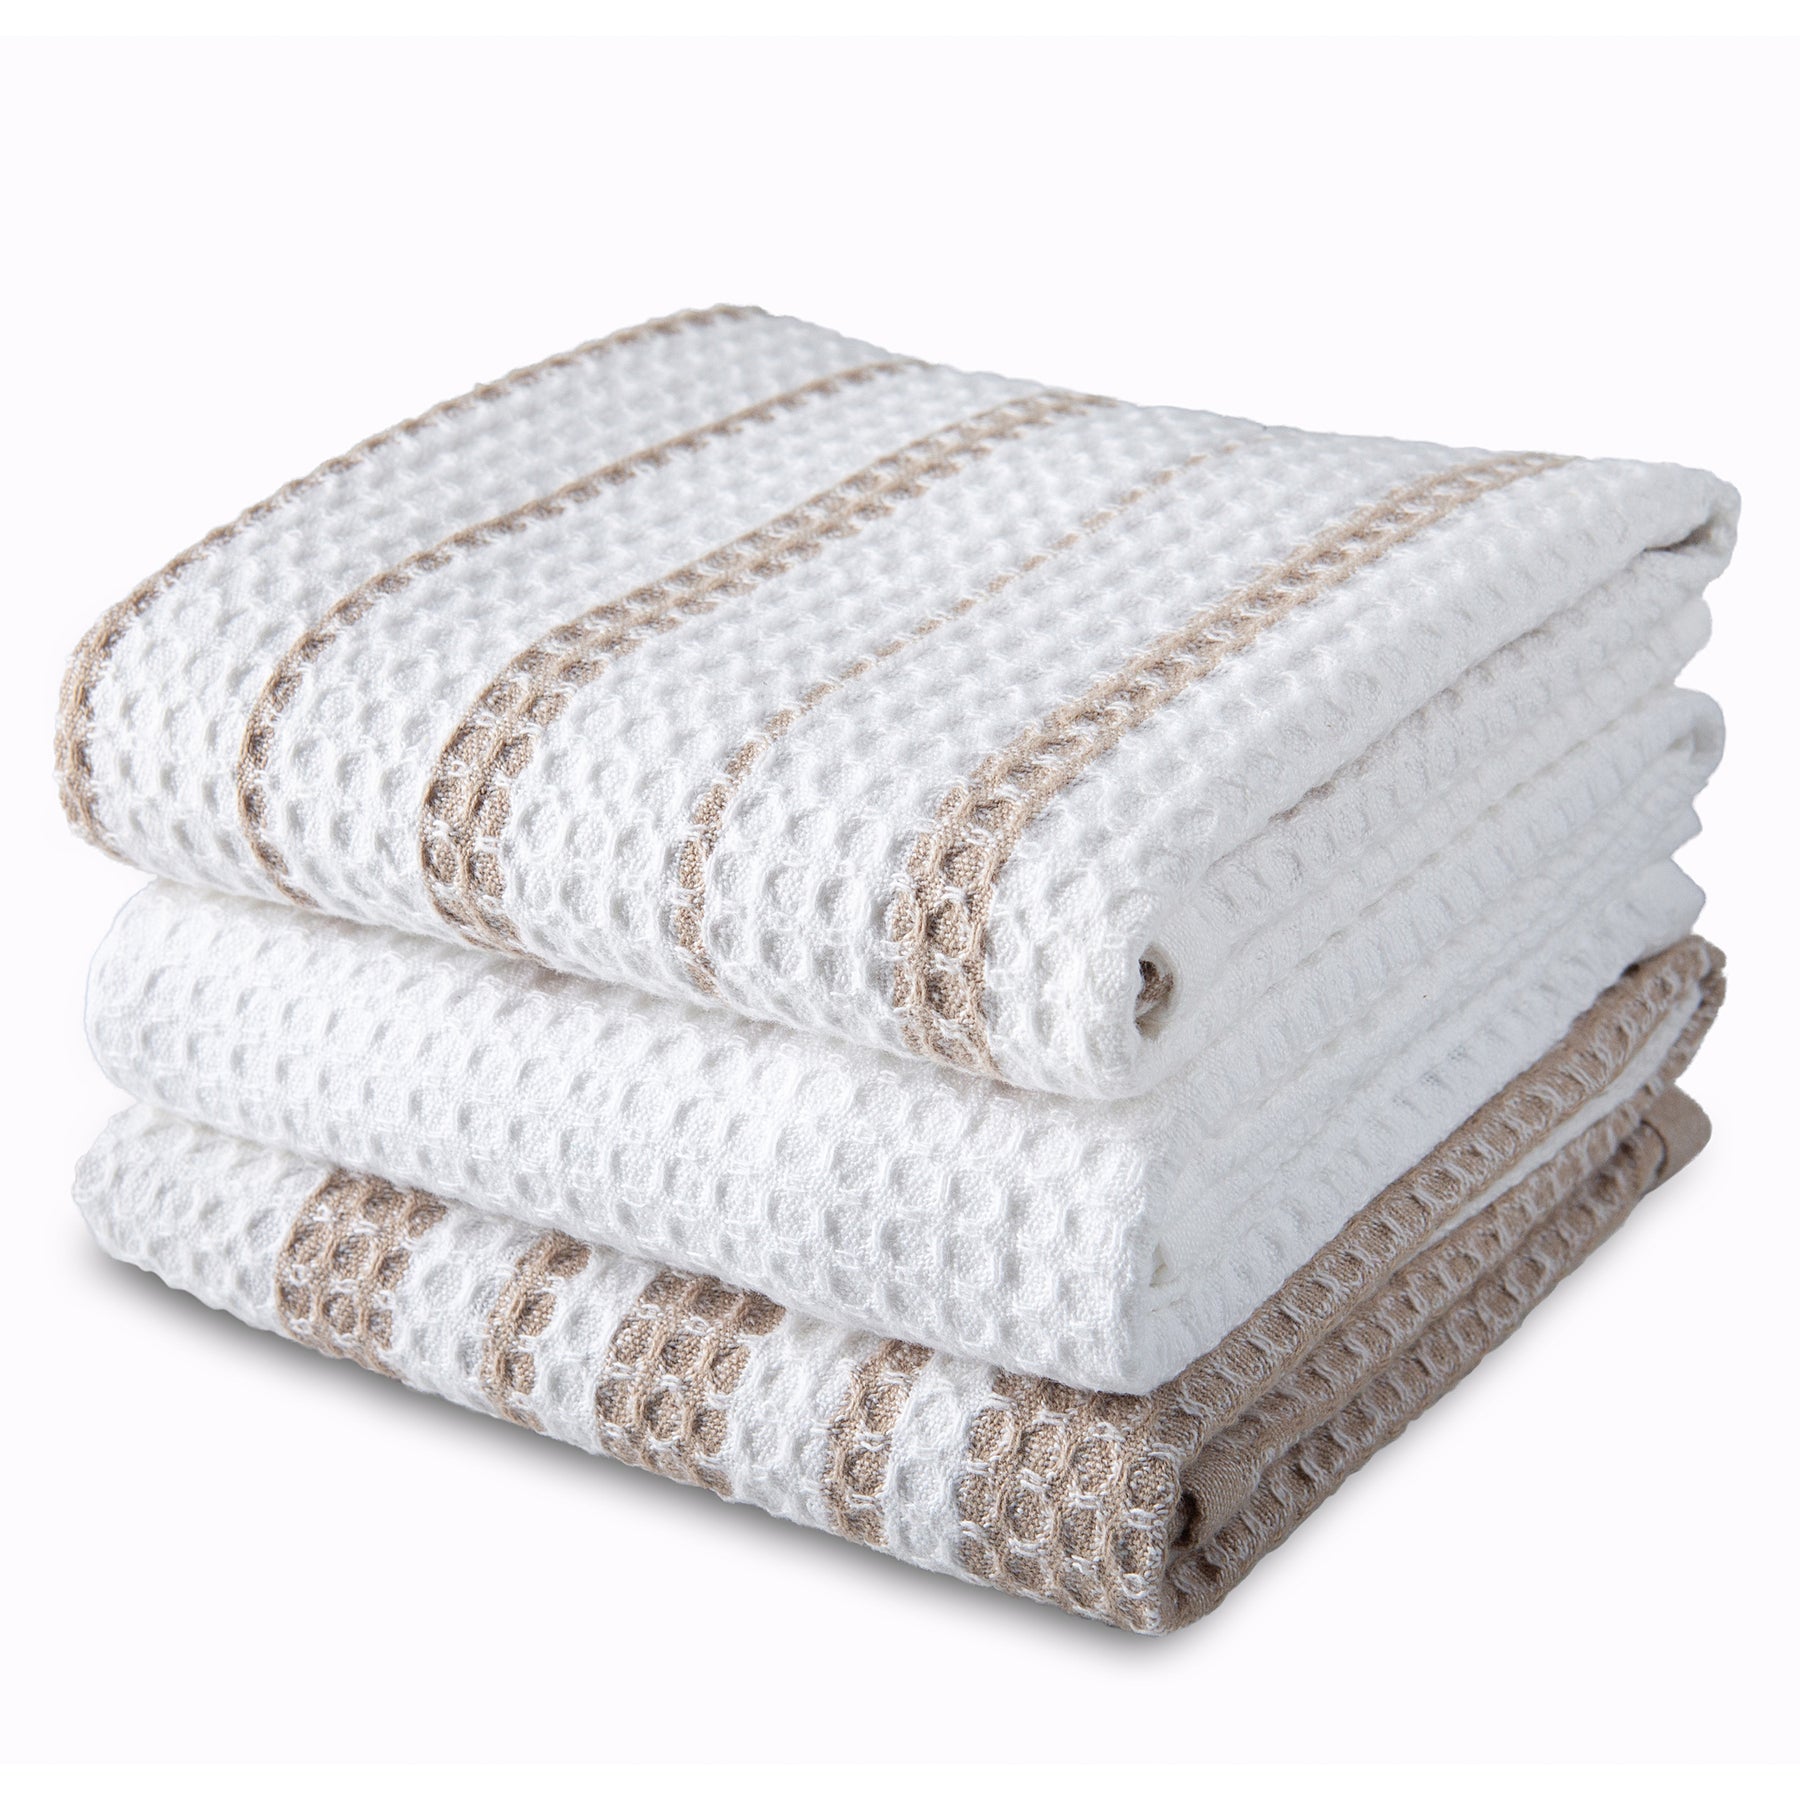 Sticky Toffee Kitchen Towels Dishcloths 100% Cotton, White Waffle Weave  Bleach Friendly, Set of 8, 12 in x 12 in, Absorbent Cleaning Paperless Dish